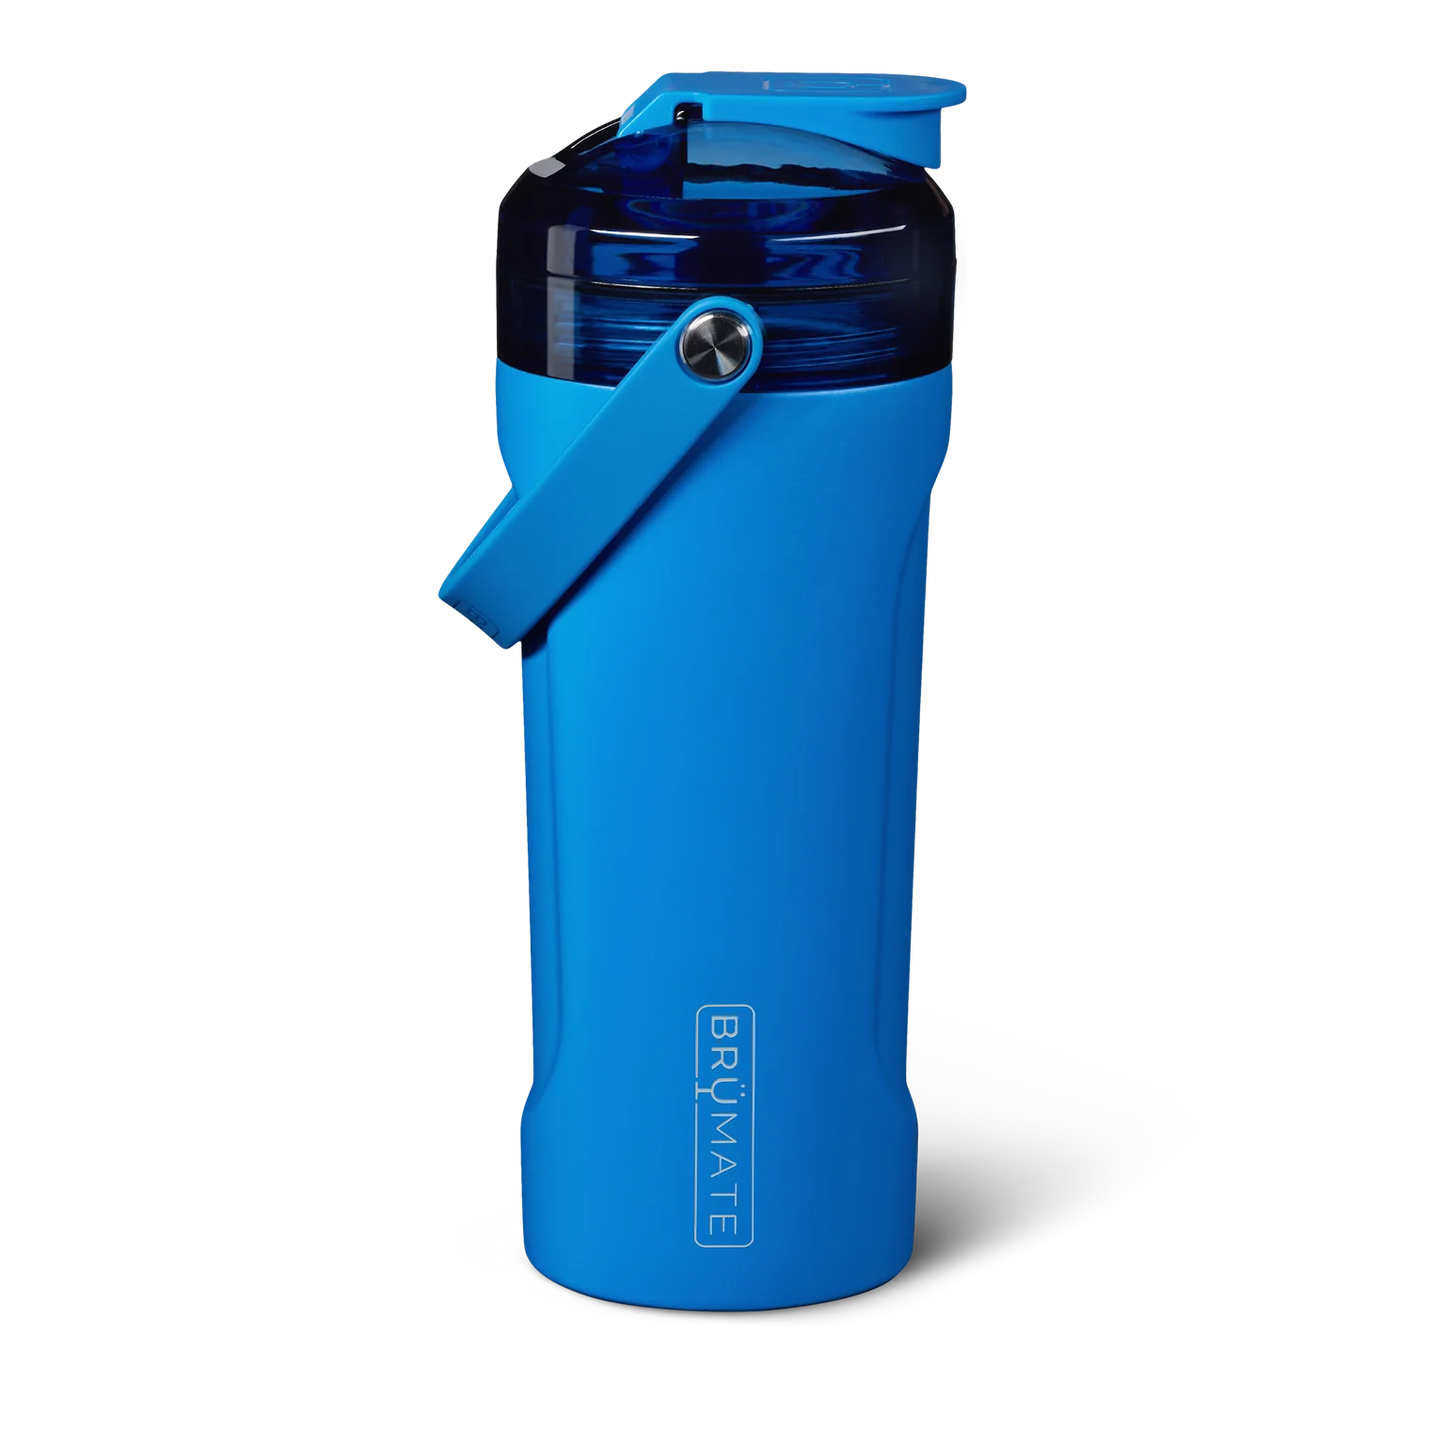 The MultiShaker is made for elevating your fitness journey. Our built-in patent-pending agitator blends your shakes, greens, and powders without any clumps, while also serving as a water infuser for herbs and fruits. It includes our BevGuard™ insulation to keep ice for 24+ hours, a spill-proof MagFlip™ lid, volume markings on the inside, a durable silicone handle, a non-slip base, and the ability to interchange tops with our MÜV or Straw Lids, making it perfect for any workout or adventure.(Azure)